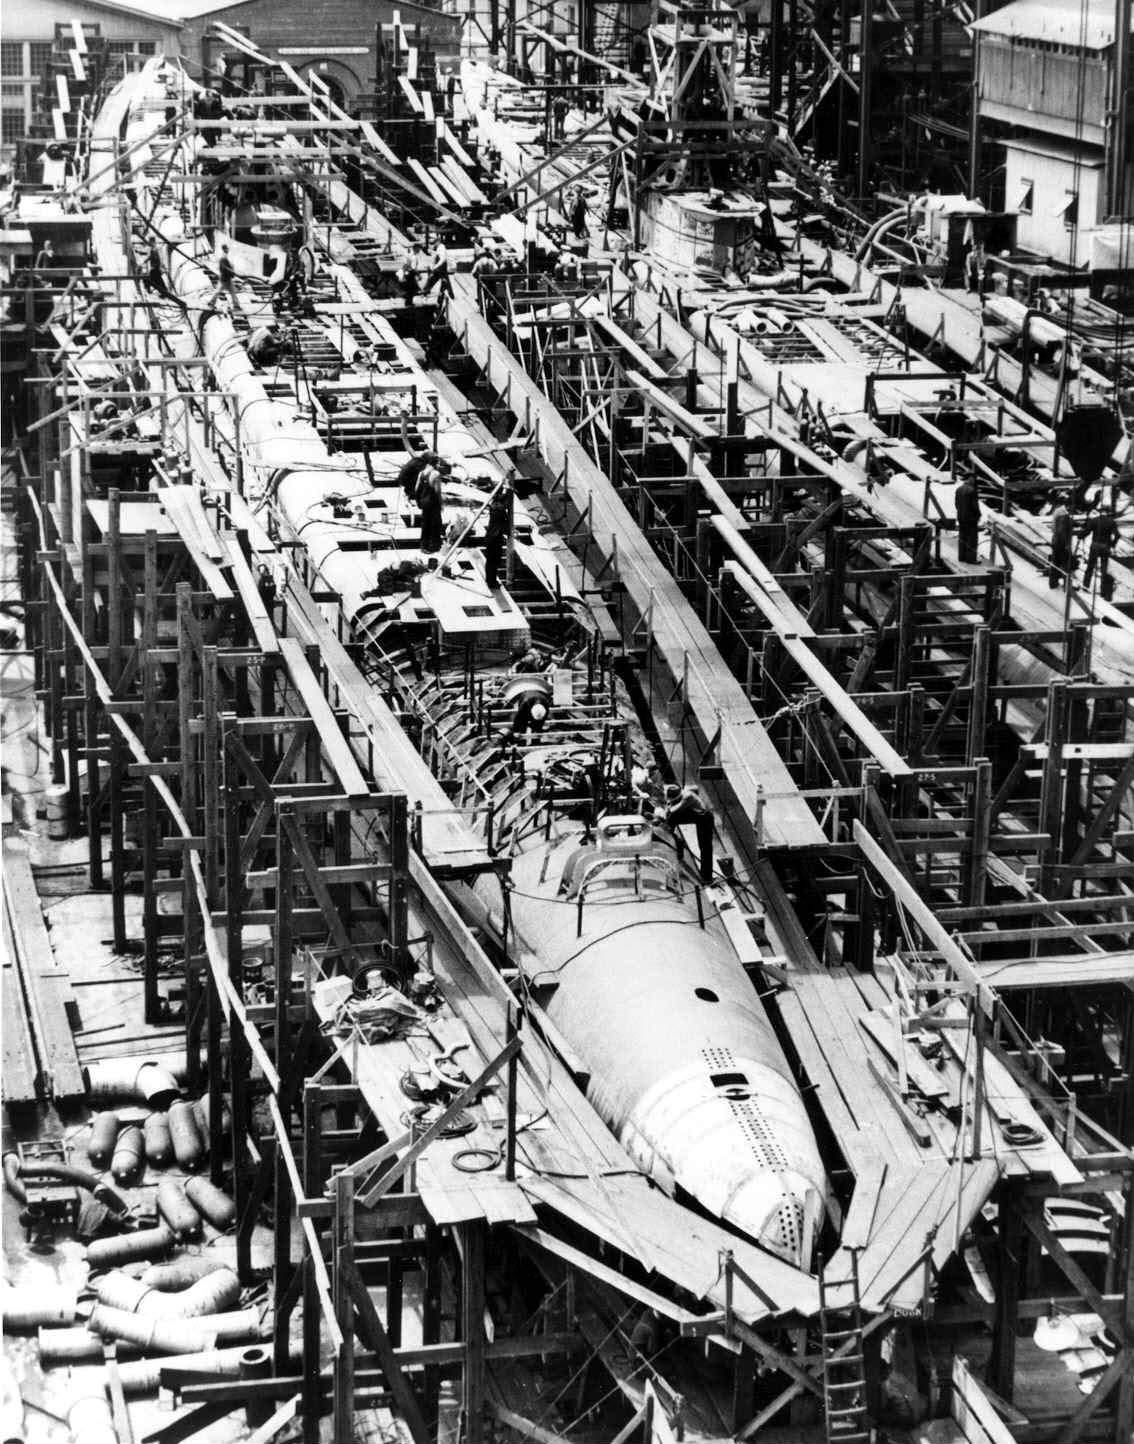 Tang (left) and Tilefish (right) under construction at Mare Island Navy Yard, Vallejo, California, United States, 1 Jul 1943, photo 2 of 3